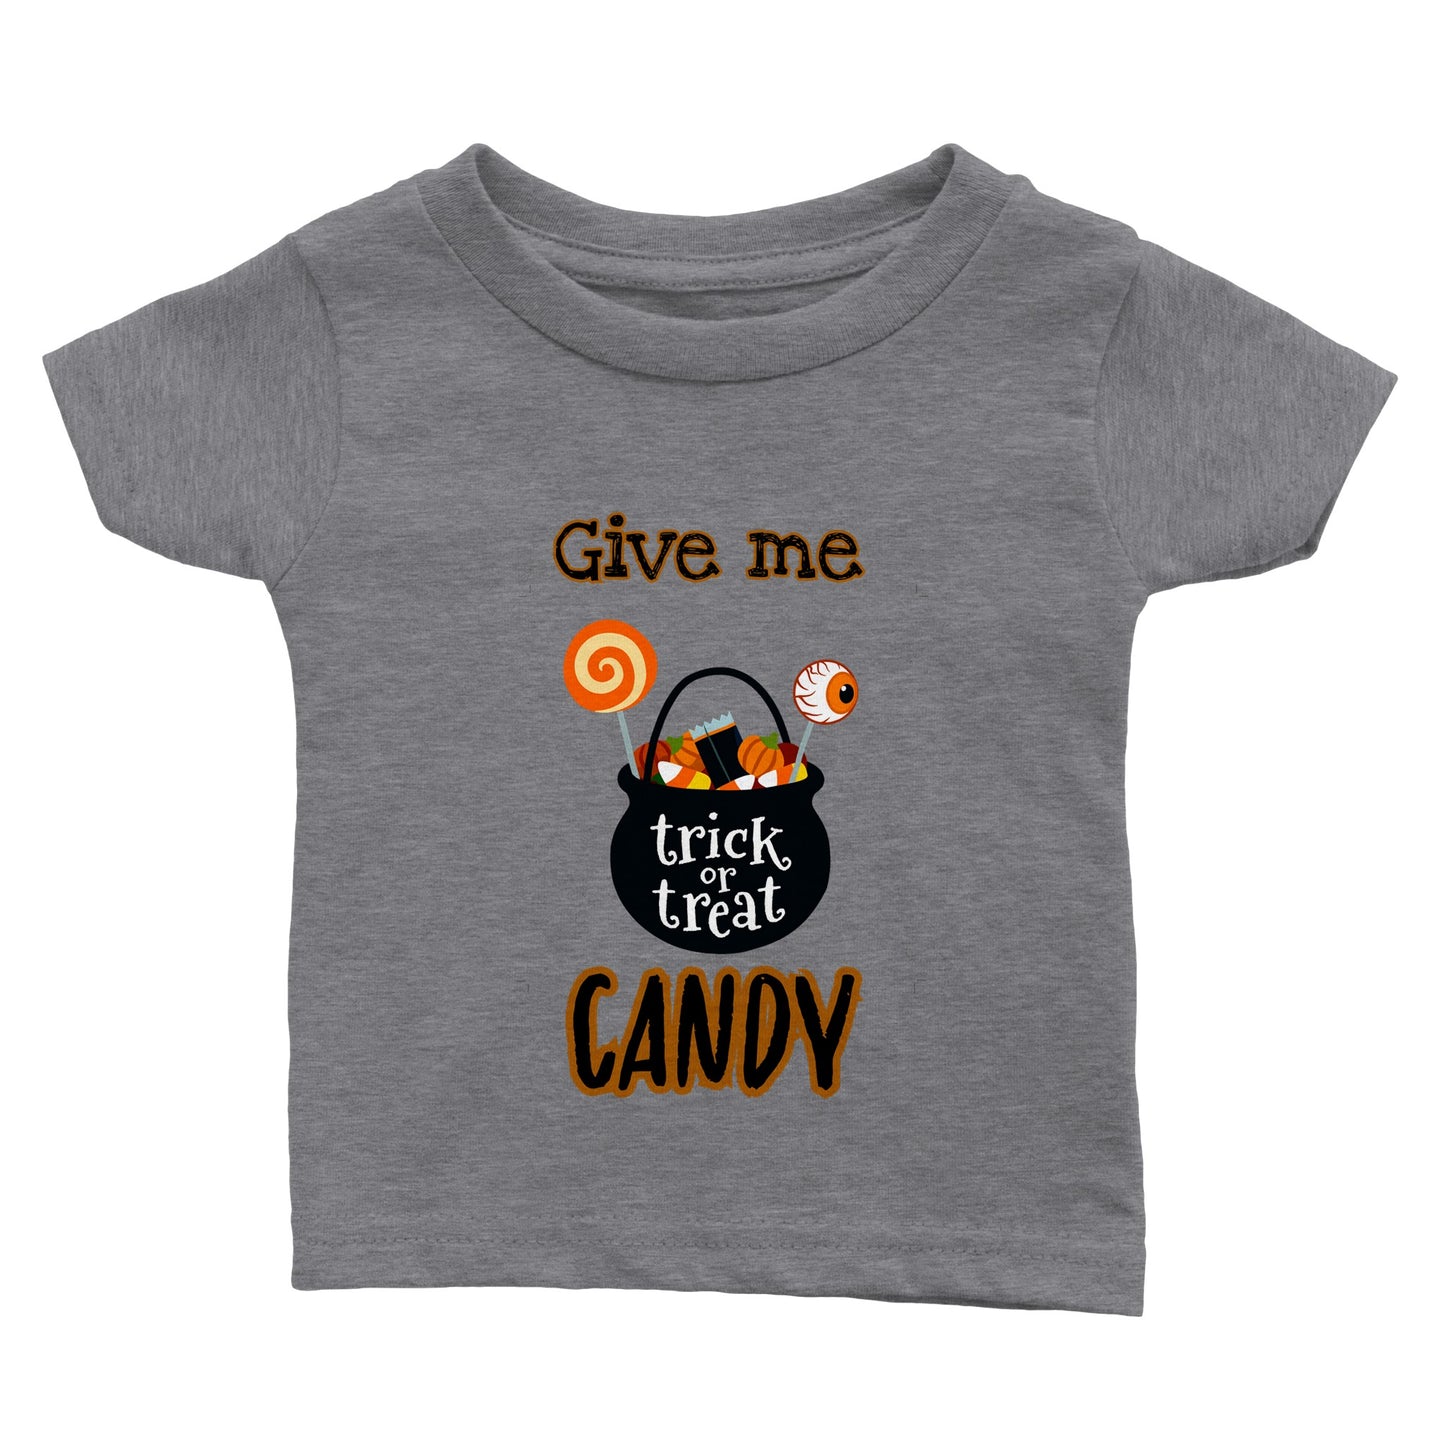 Give me candy -Classic Baby Crewneck T-shirt